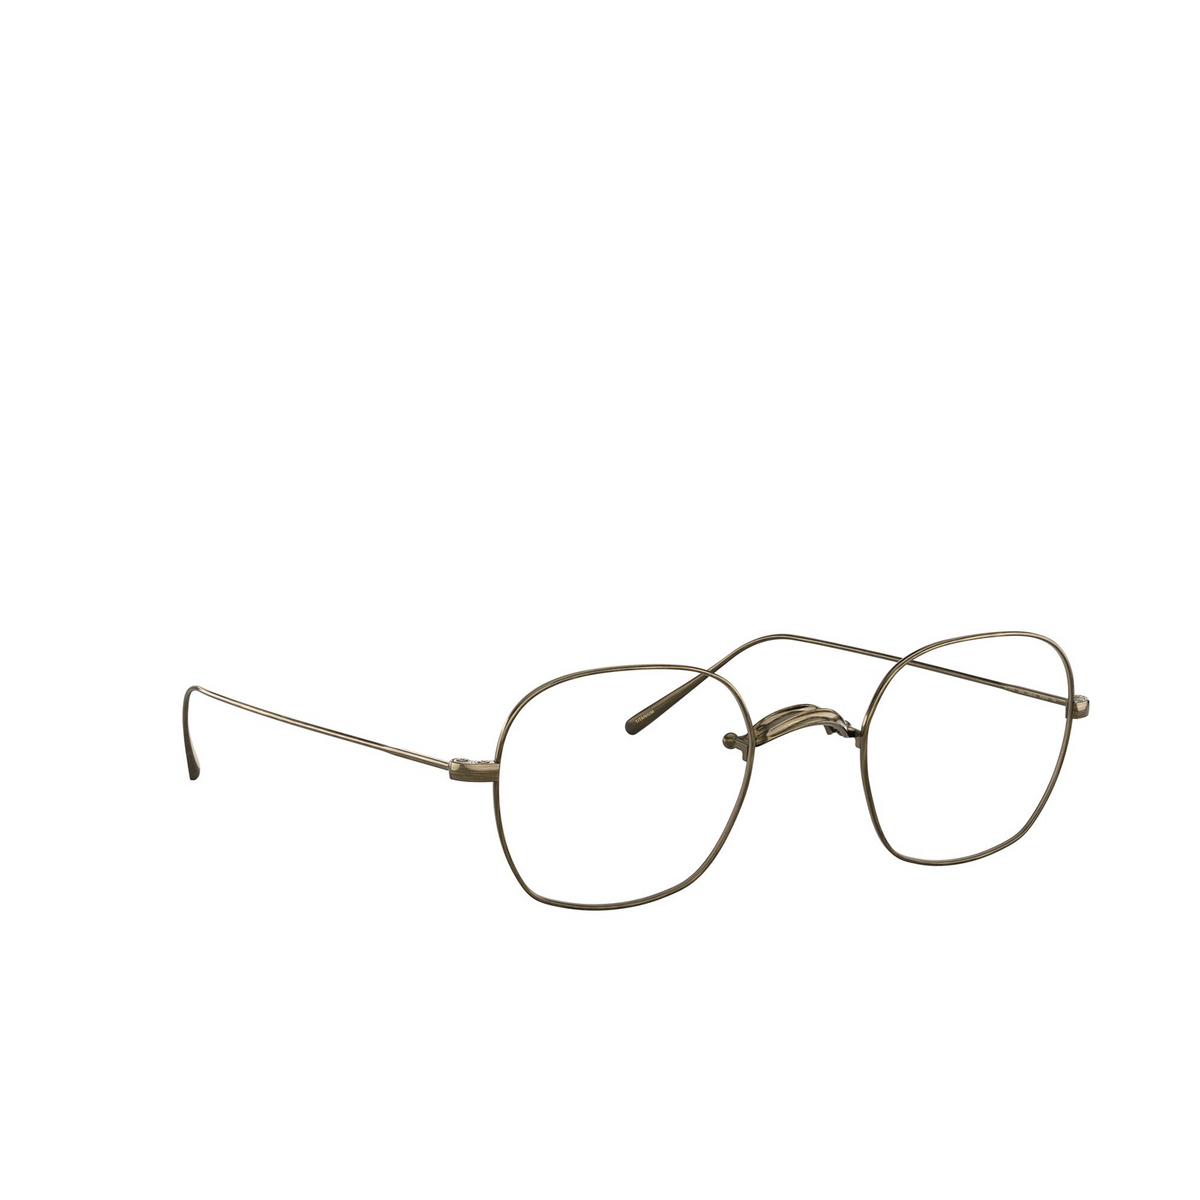 Oliver Peoples® Square Eyeglasses: Carles OV1270T color Antique Gold 5300 - three-quarters view.